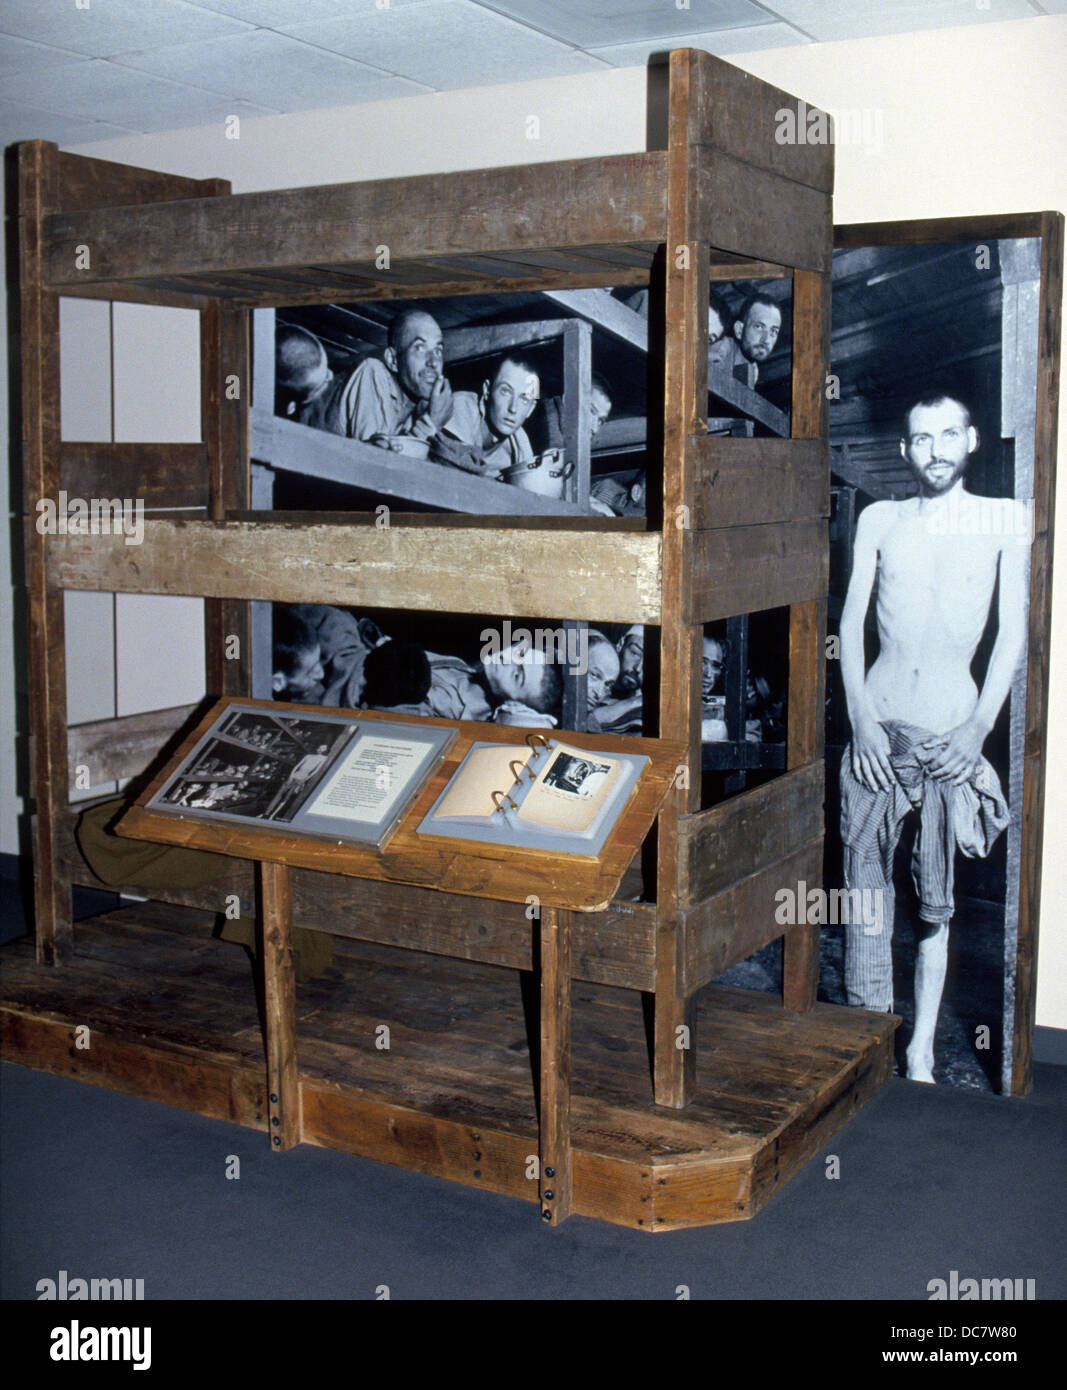 This horrific display is in the Museum of Tolerance where Holocaust memorials are part of the Simon Wiesenthal Center in Los Angeles, California, USA. Stock Photo